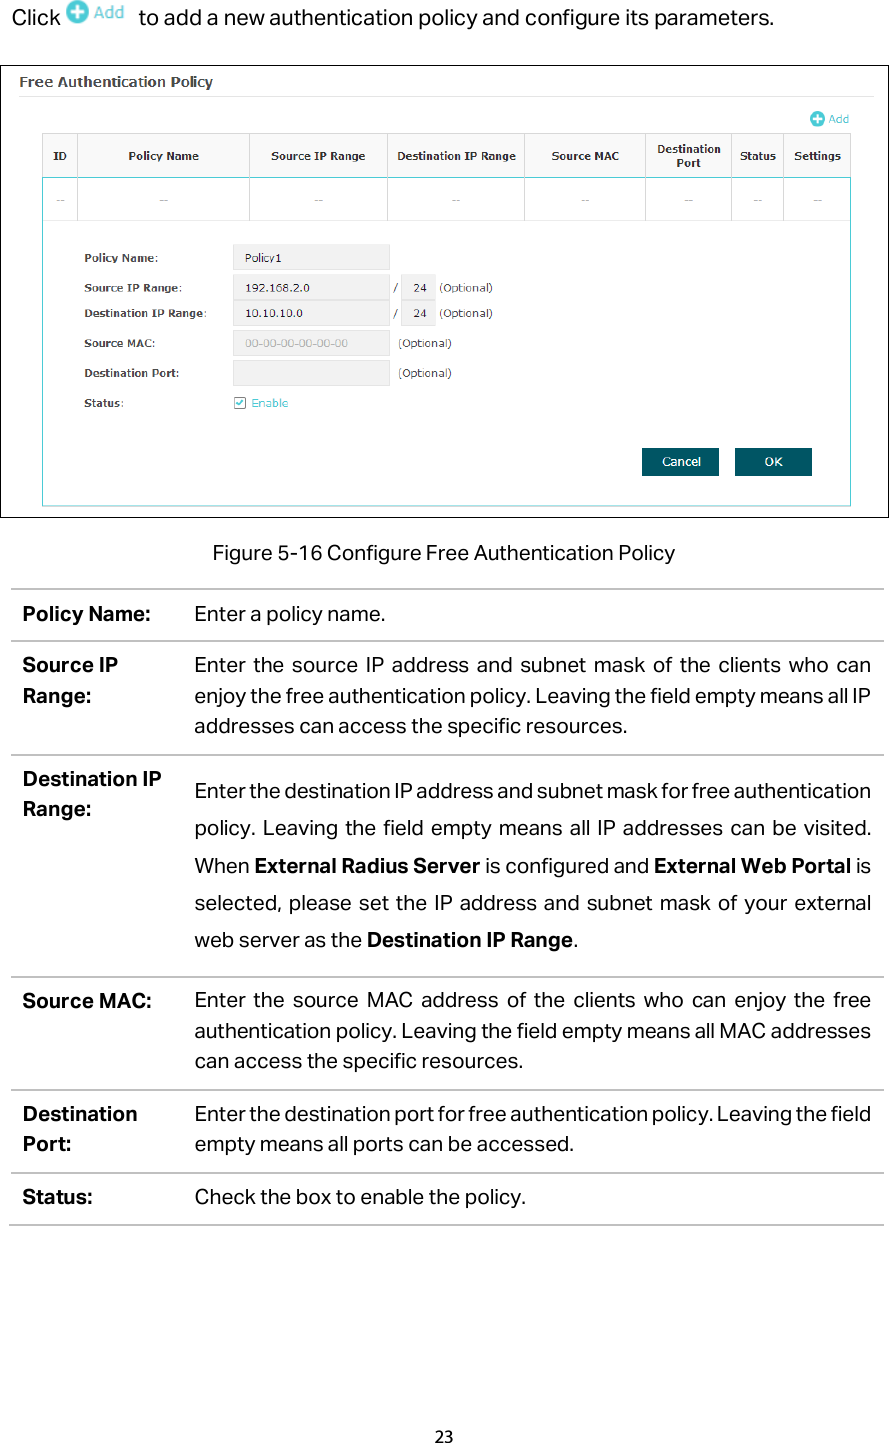 Click  to add a new authentication policy and configure its parameters.  Figure 5-16 Configure Free Authentication Policy Policy Name: Enter a policy name. Source IP Range: Enter the source IP address and subnet mask of the clients who can enjoy the free authentication policy. Leaving the field empty means all IP addresses can access the specific resources.   Destination IP Range: Enter the destination IP address and subnet mask for free authentication policy. Leaving the field empty means all IP addresses can be visited. When External Radius Server is configured and External Web Portal is selected, please set the IP address and subnet mask of your external web server as the Destination IP Range. Source MAC: Enter the source MAC address of the clients who can enjoy the free authentication policy. Leaving the field empty means all MAC addresses can access the specific resources. Destination Port: Enter the destination port for free authentication policy. Leaving the field empty means all ports can be accessed. Status: Check the box to enable the policy. 23  